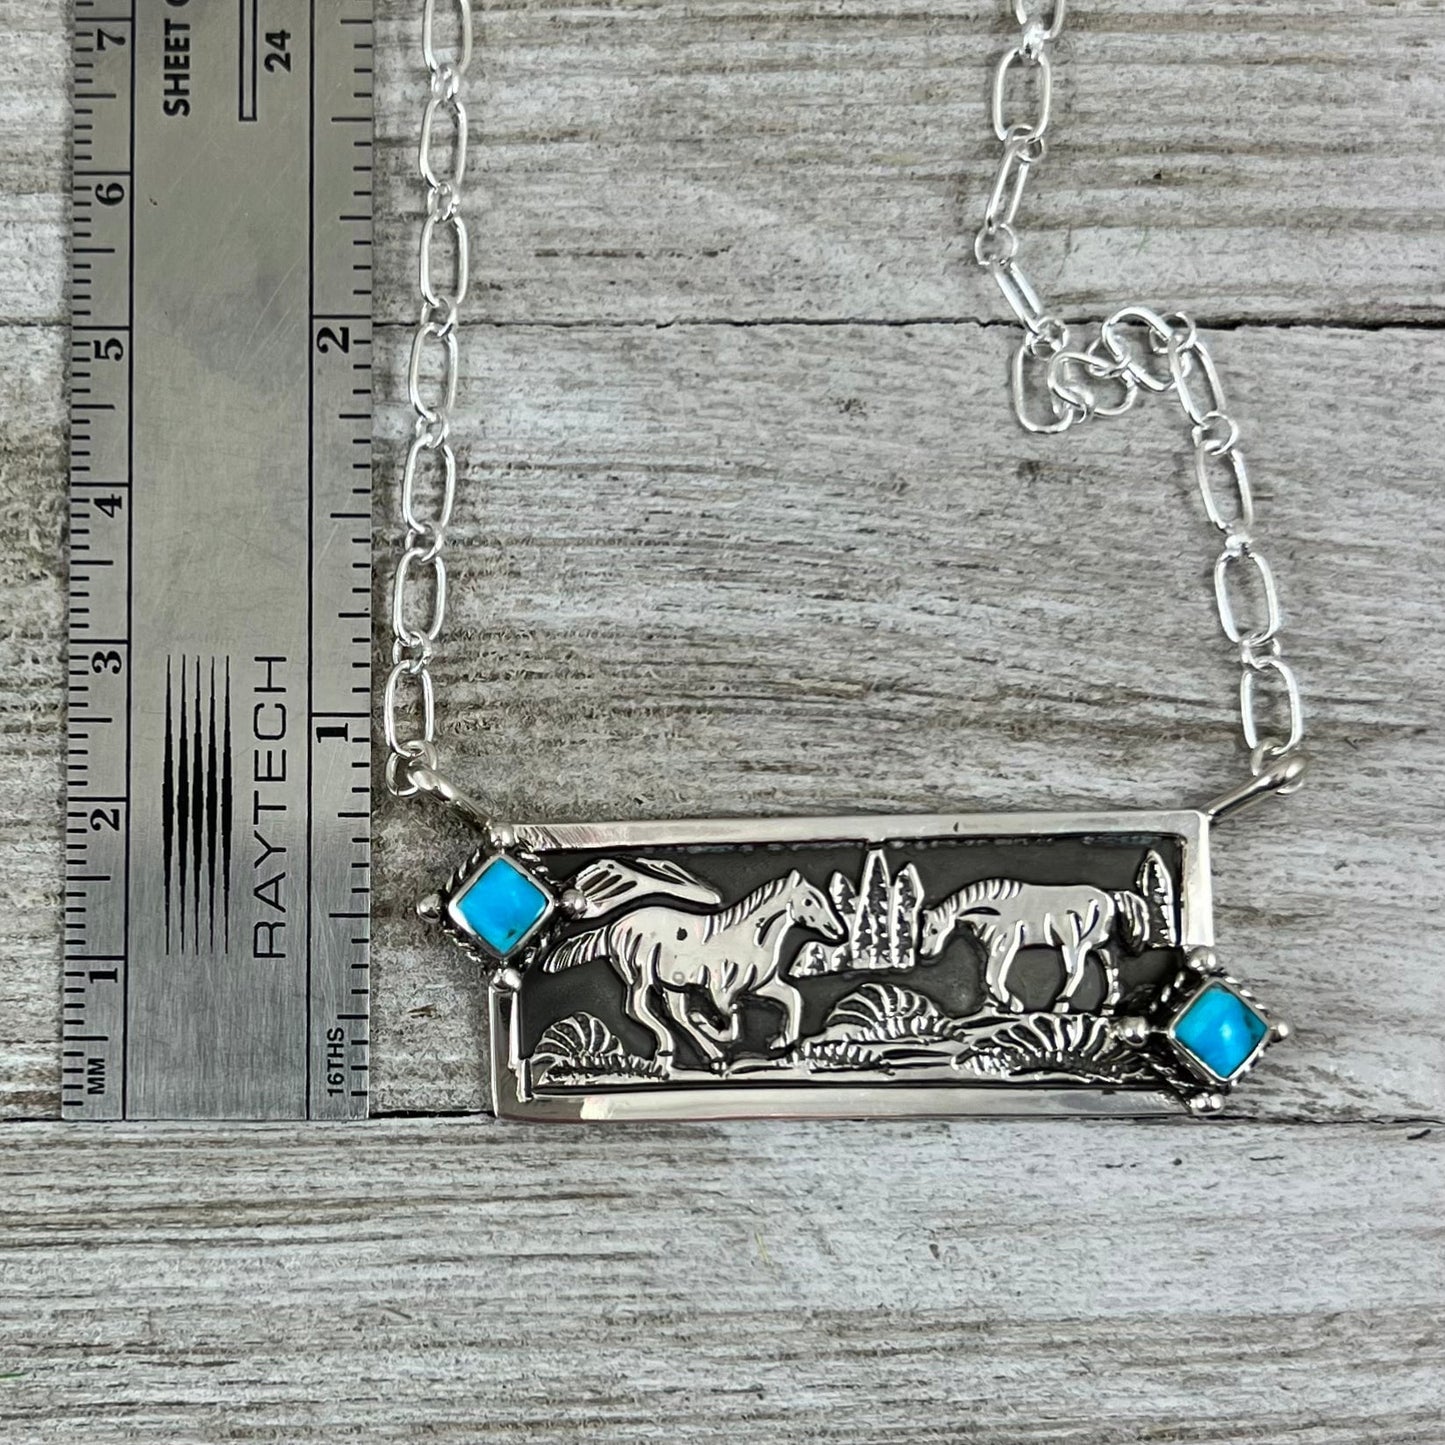 Sterling Silver Horse Design Bar Necklace, Sleeping Beauty Turquoise, Handmade by Navajo artist, Jeremy Delgarito, signed